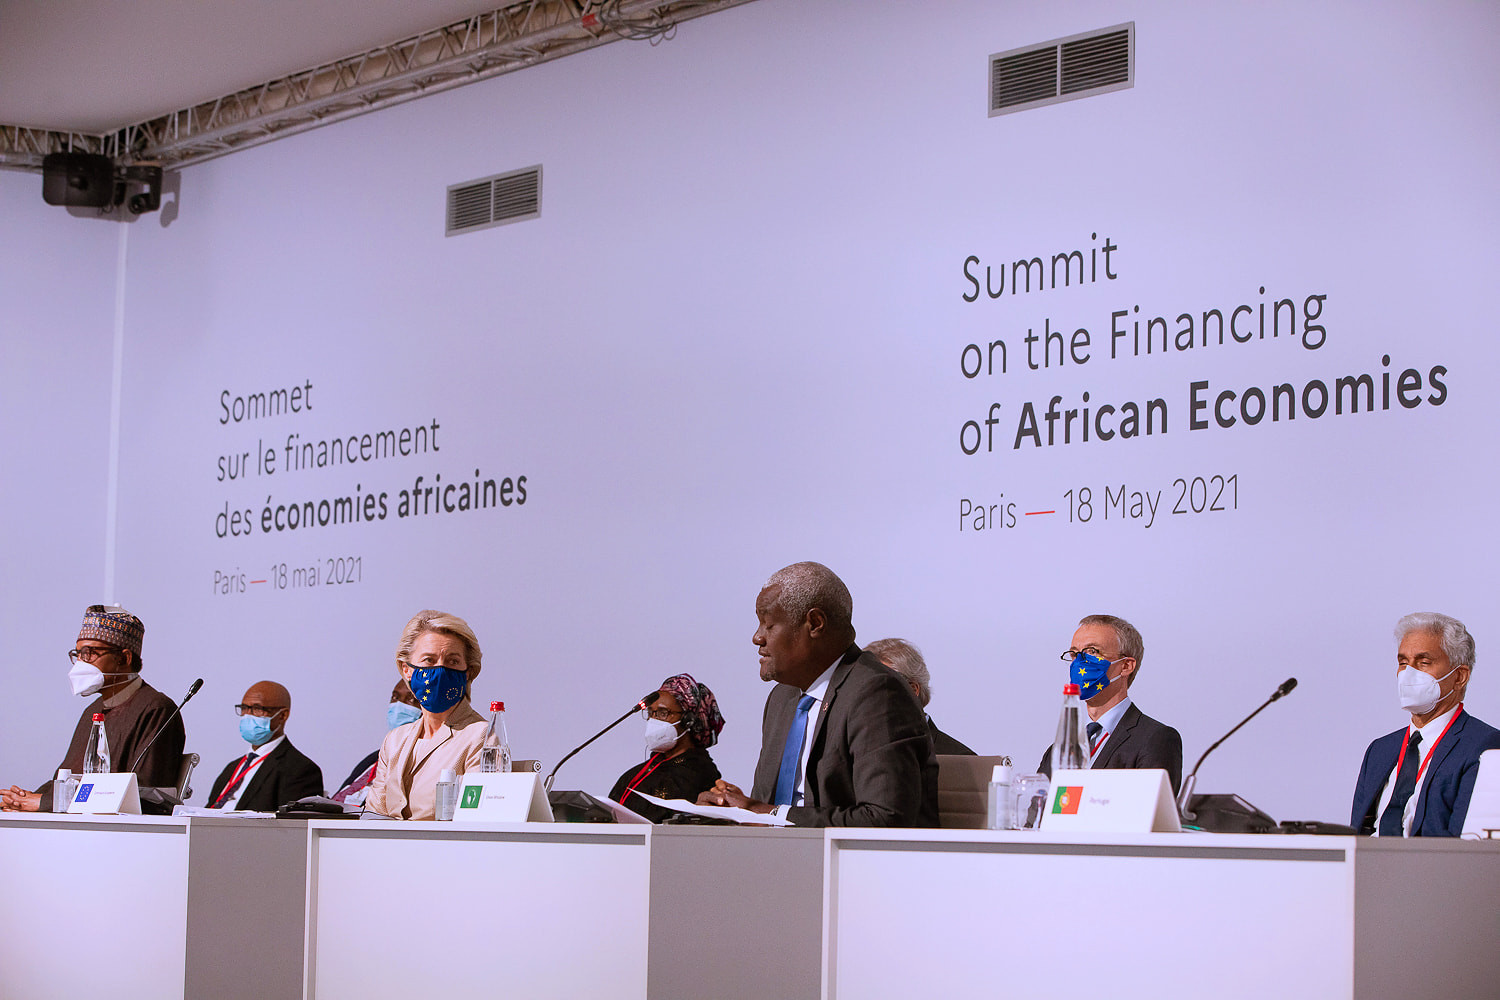 President Buhari speaks at African Financial Summit in Paris, calls for debt restructuring and release of COVID19 vaccines to African nations (photos)